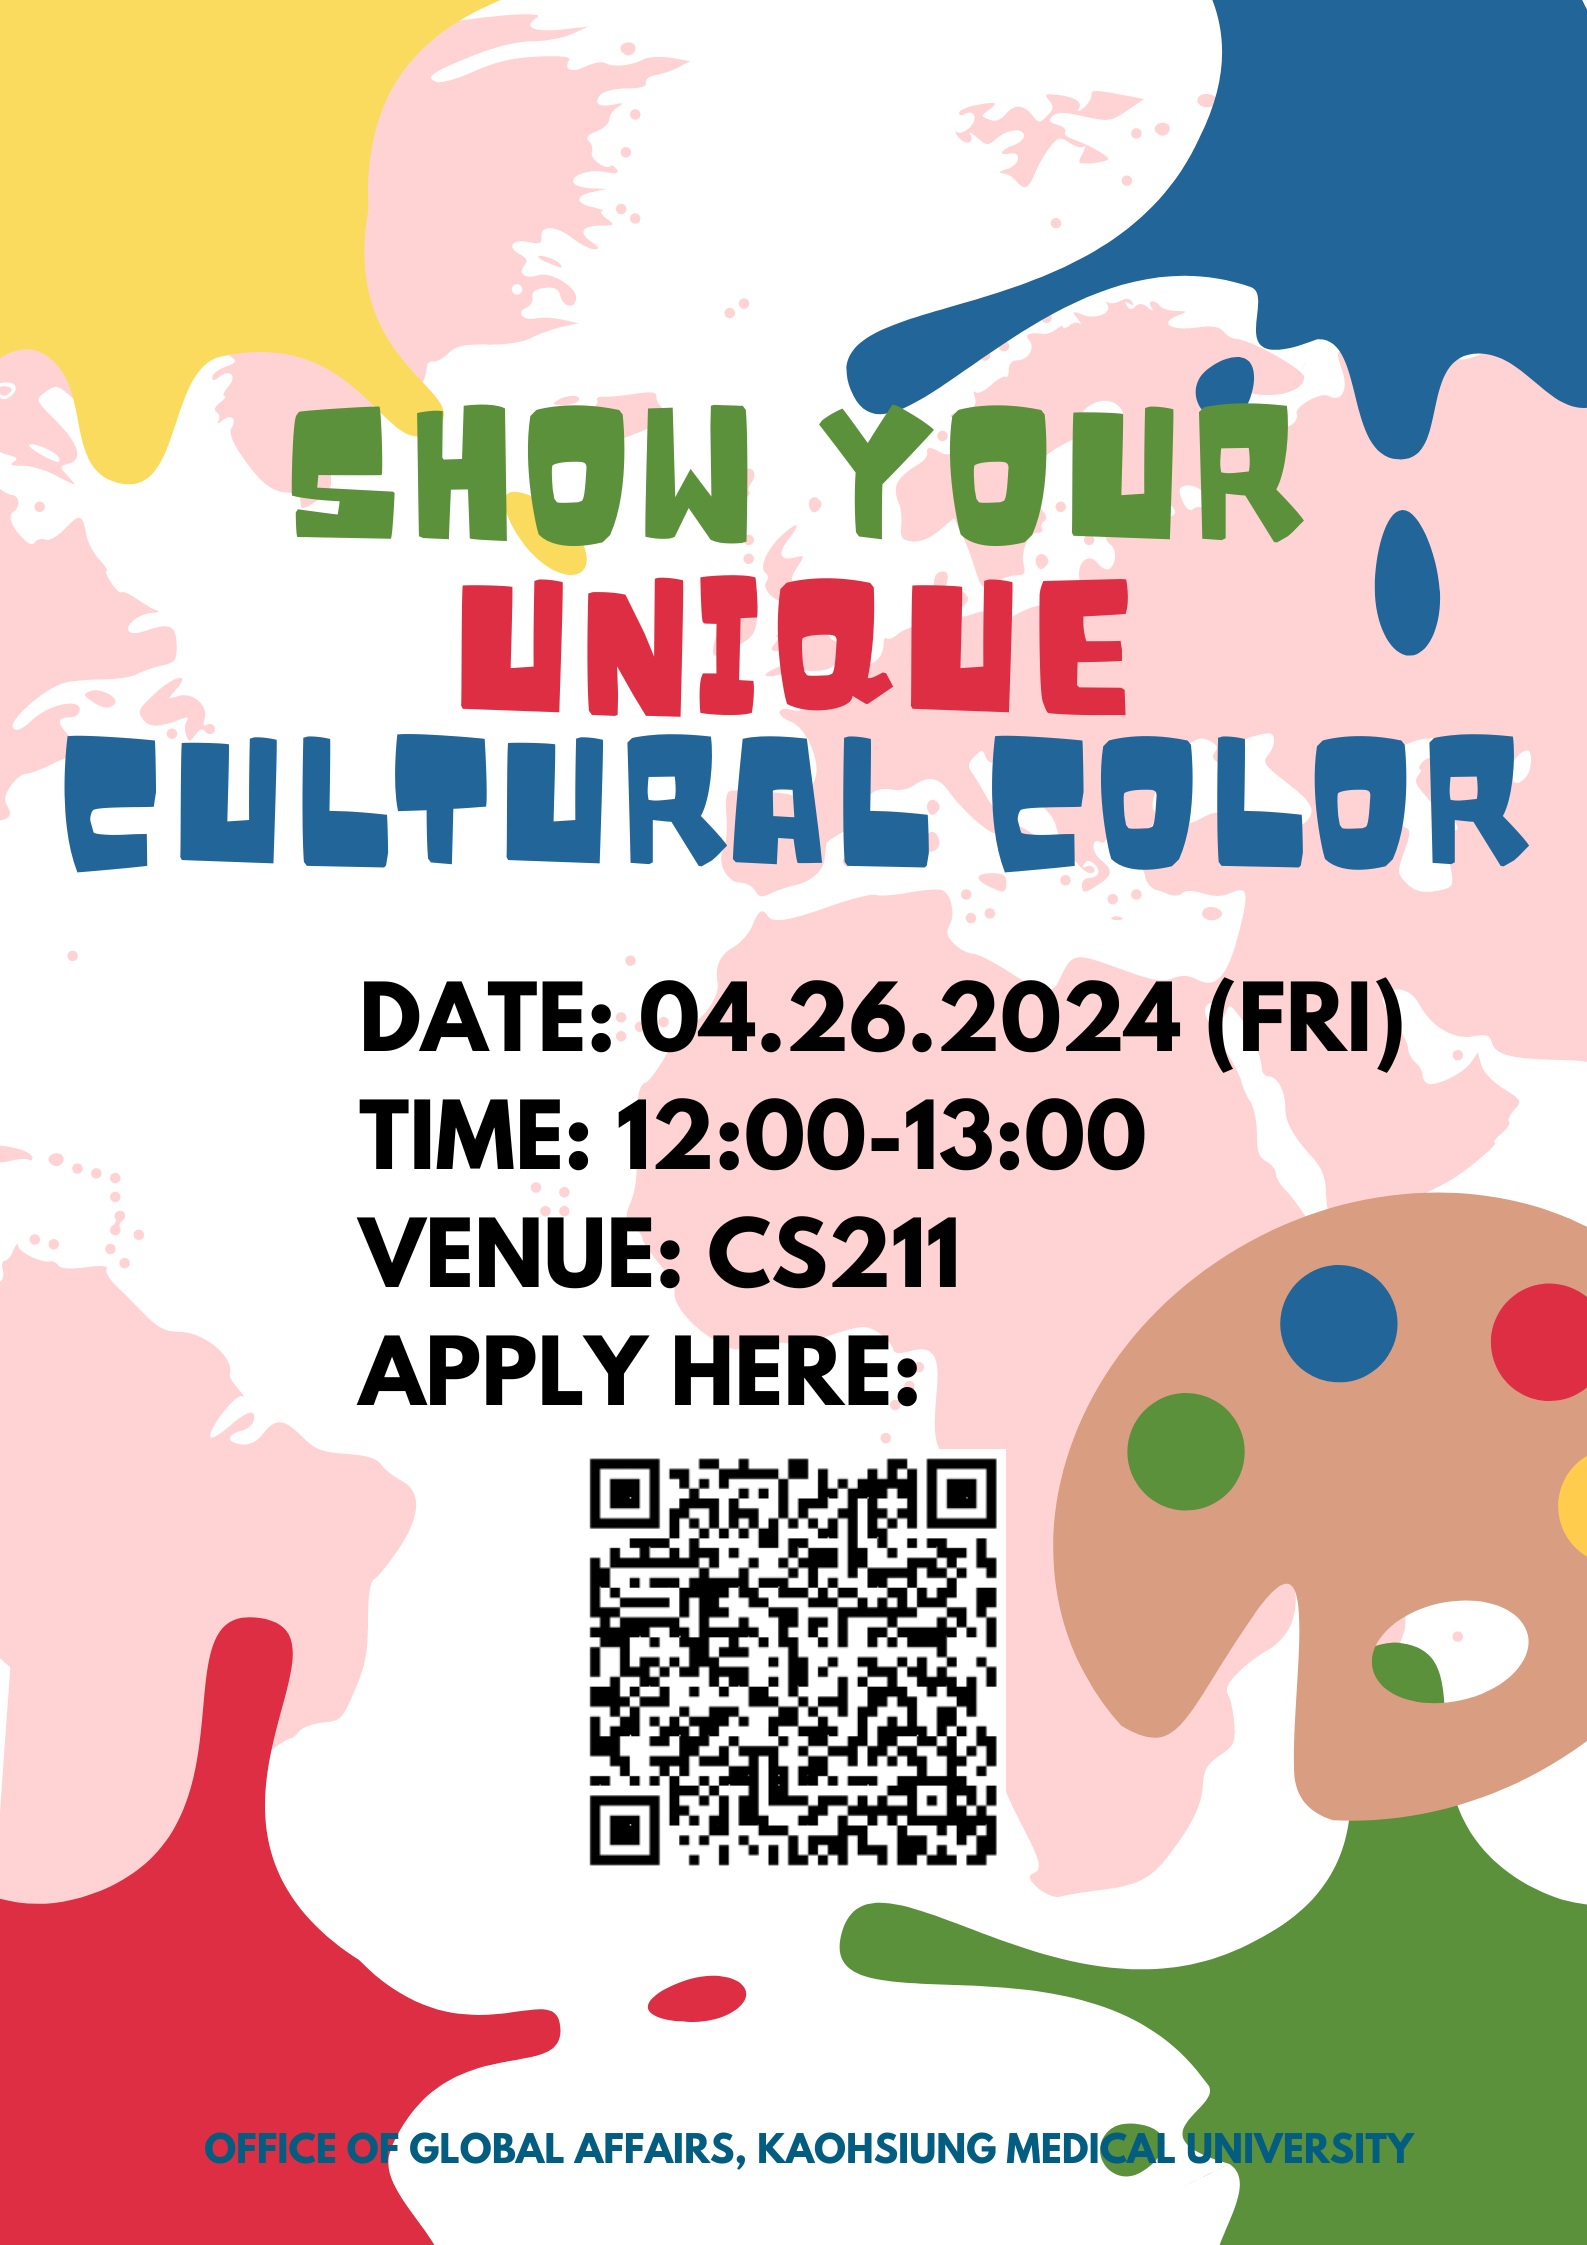 show your cutural color